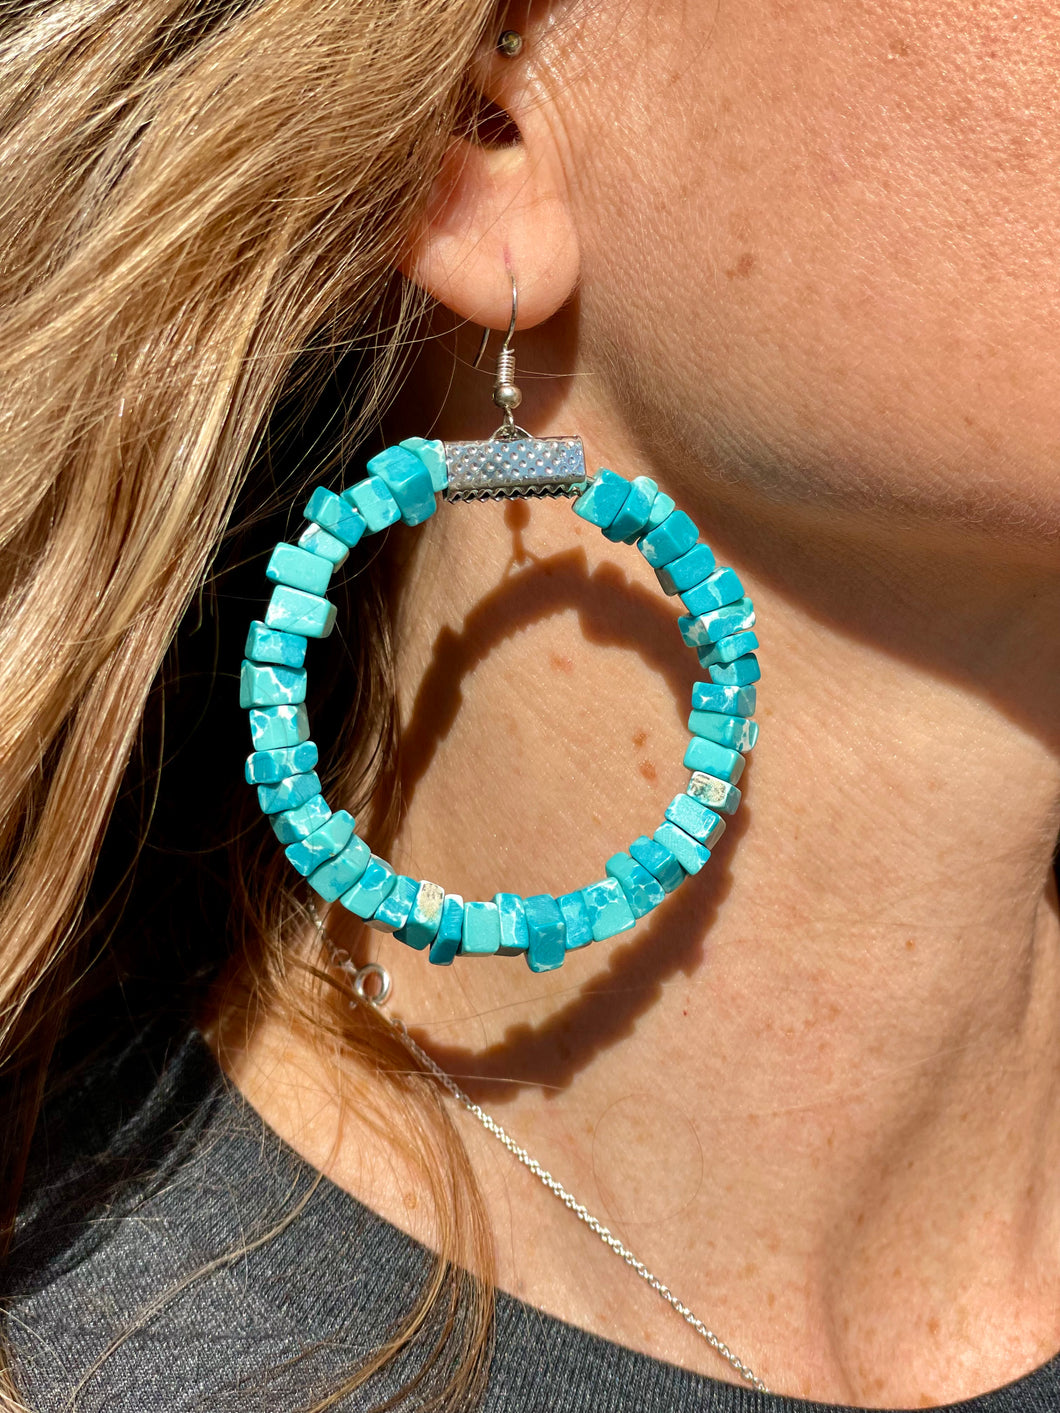 Toco Turquoise earrings